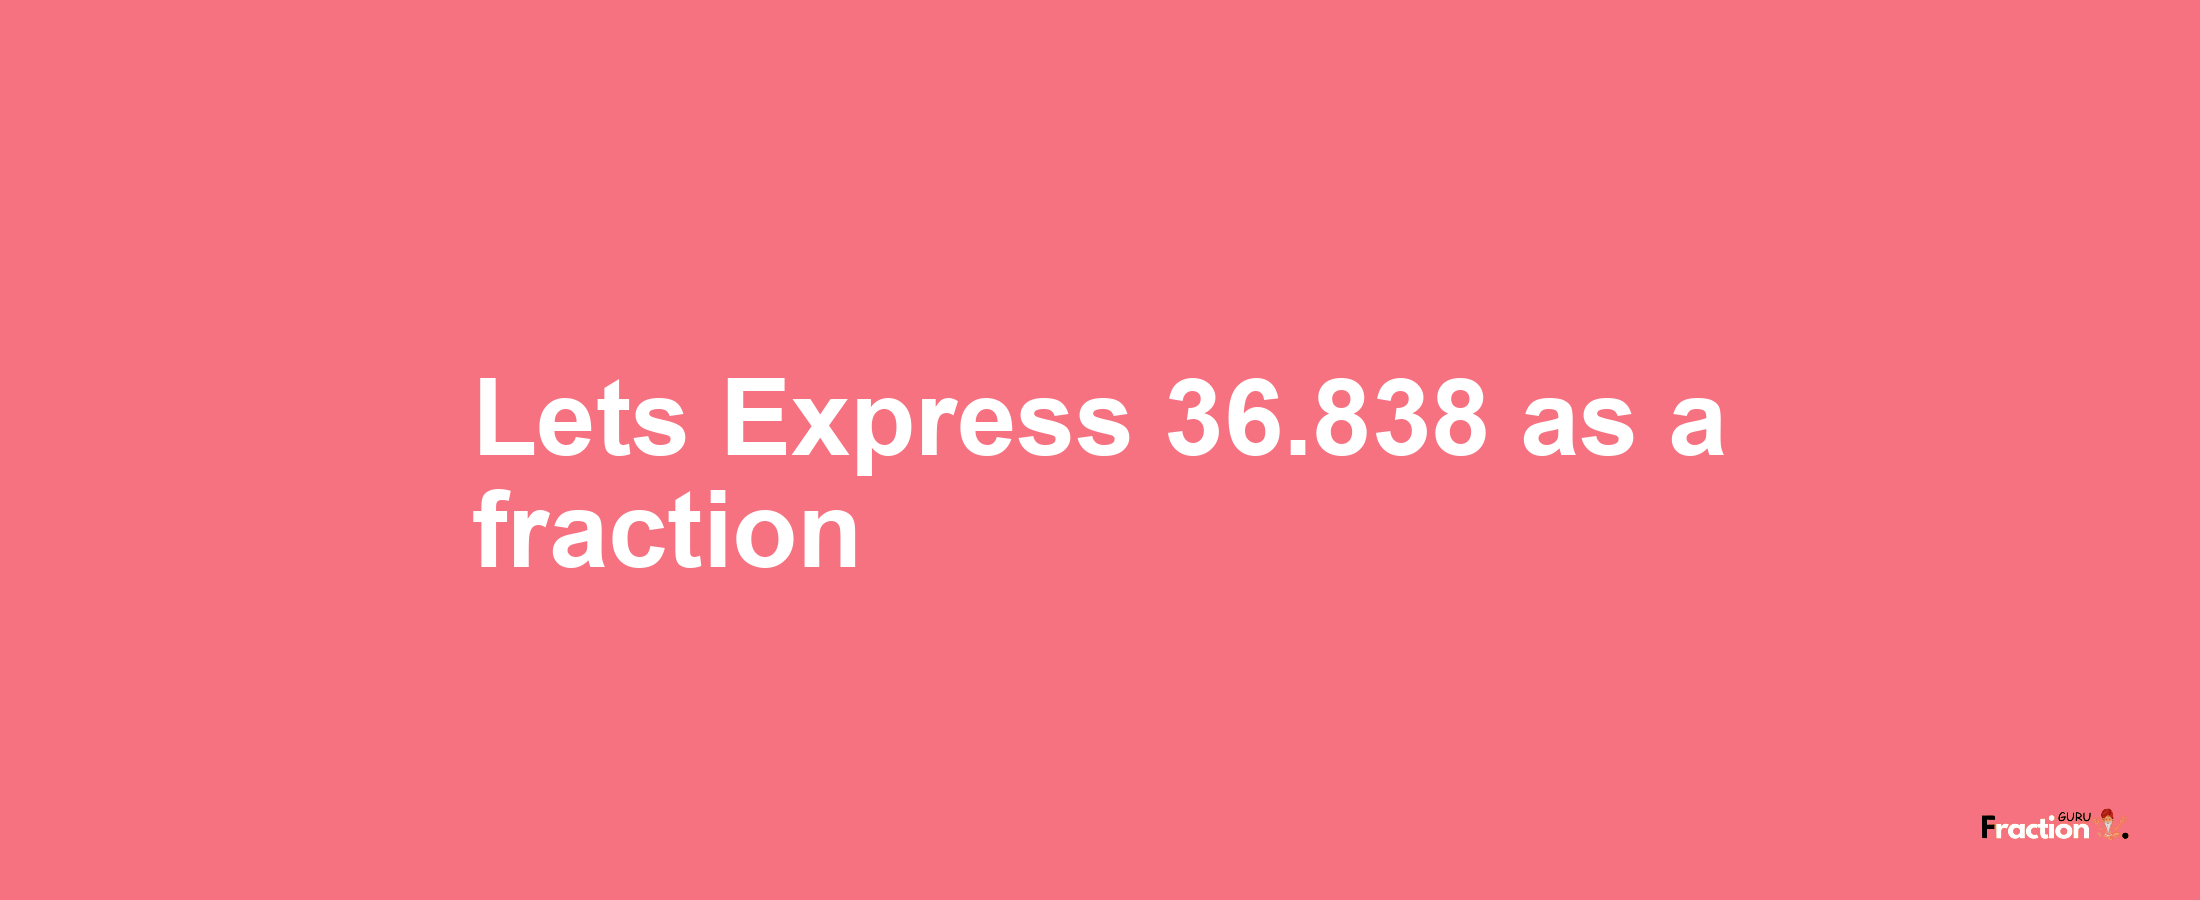 Lets Express 36.838 as afraction